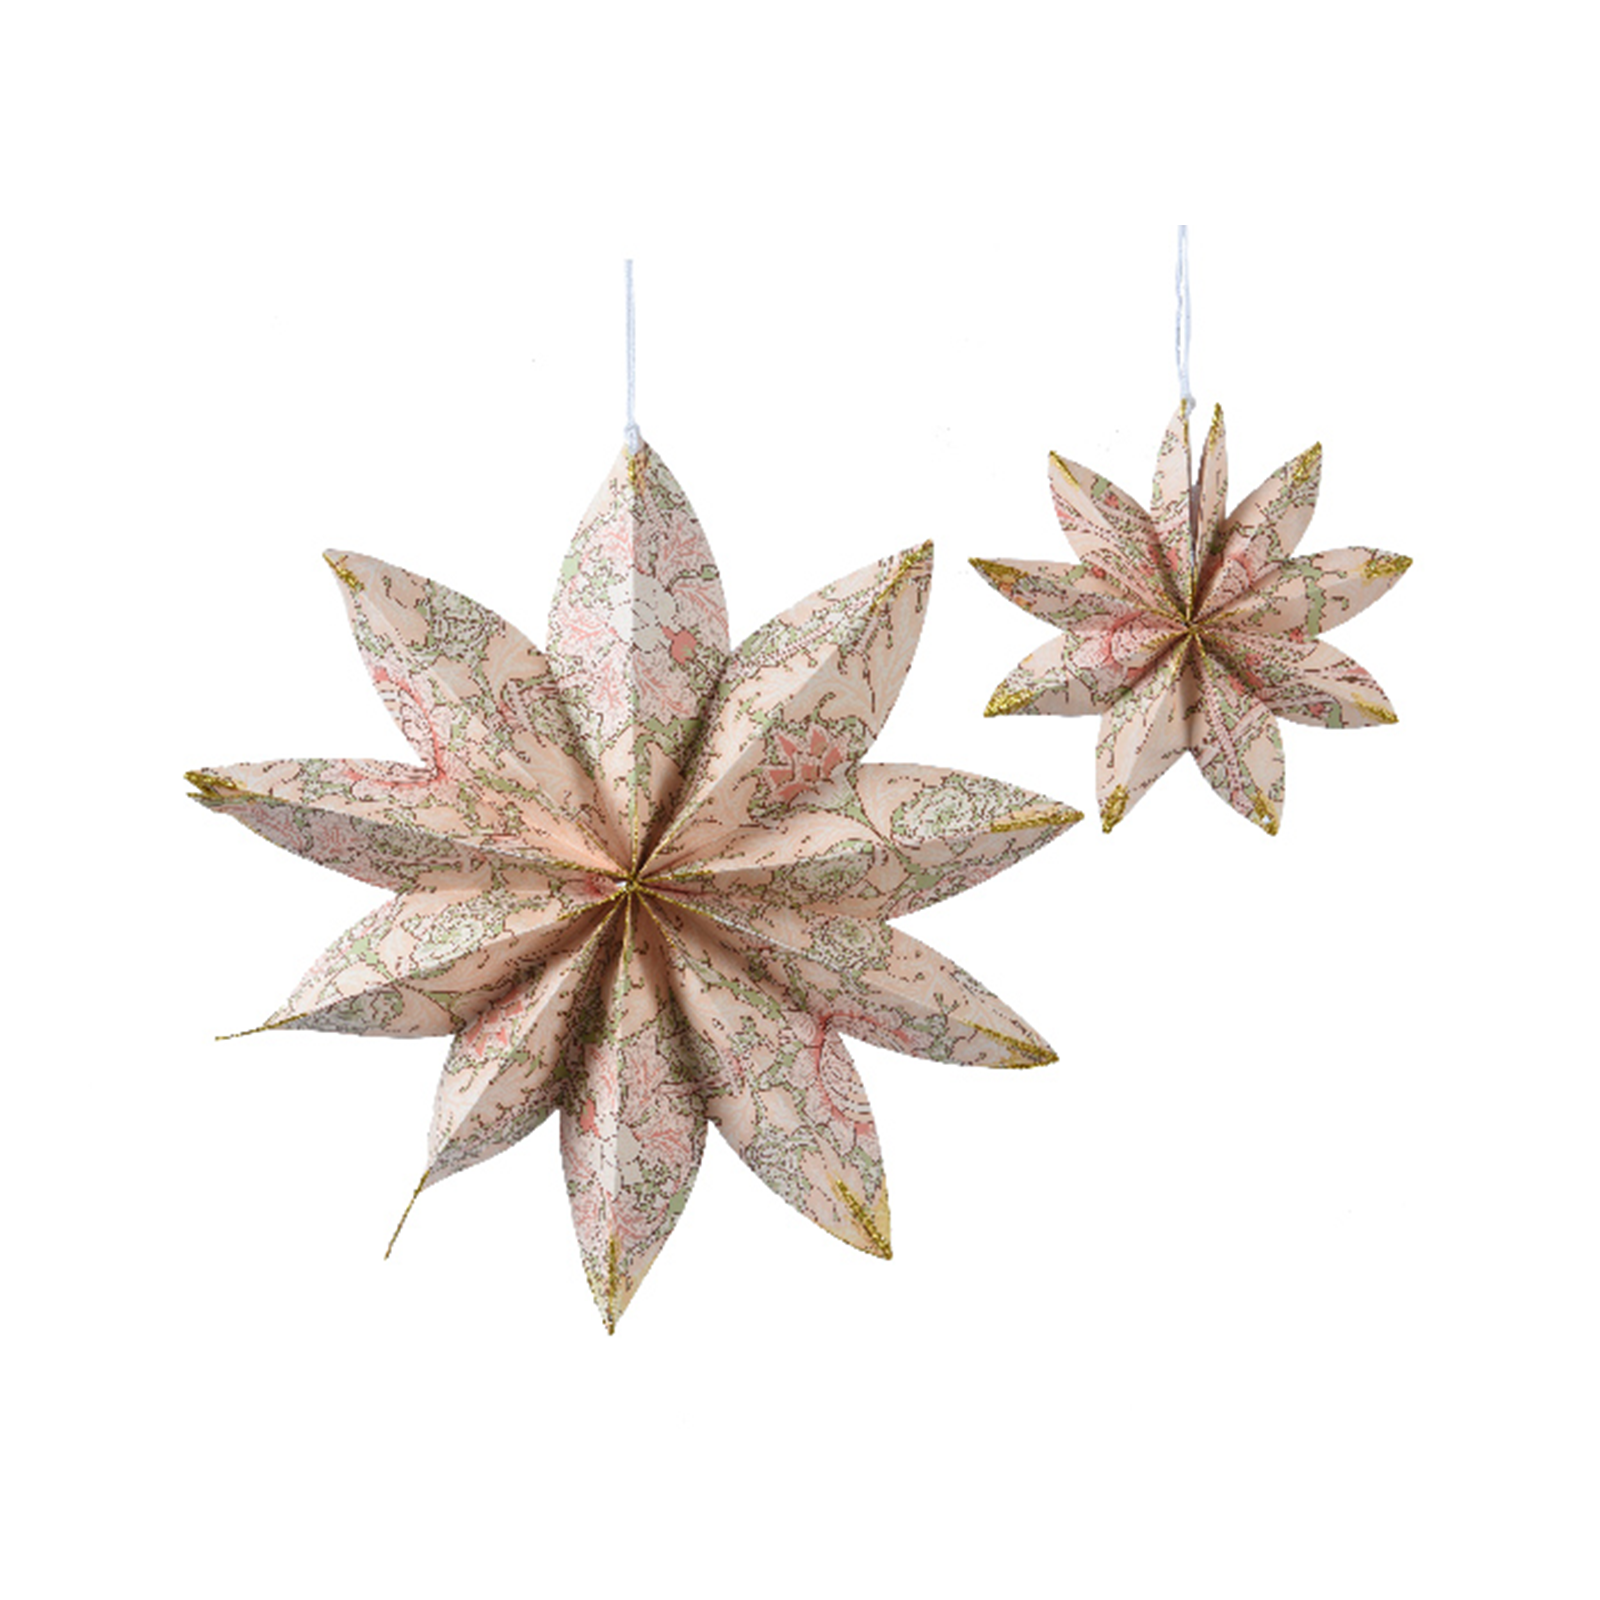 Two pink hanging paper stars, one larger and one smaller. They are patterned and dusted with glitter at the points.